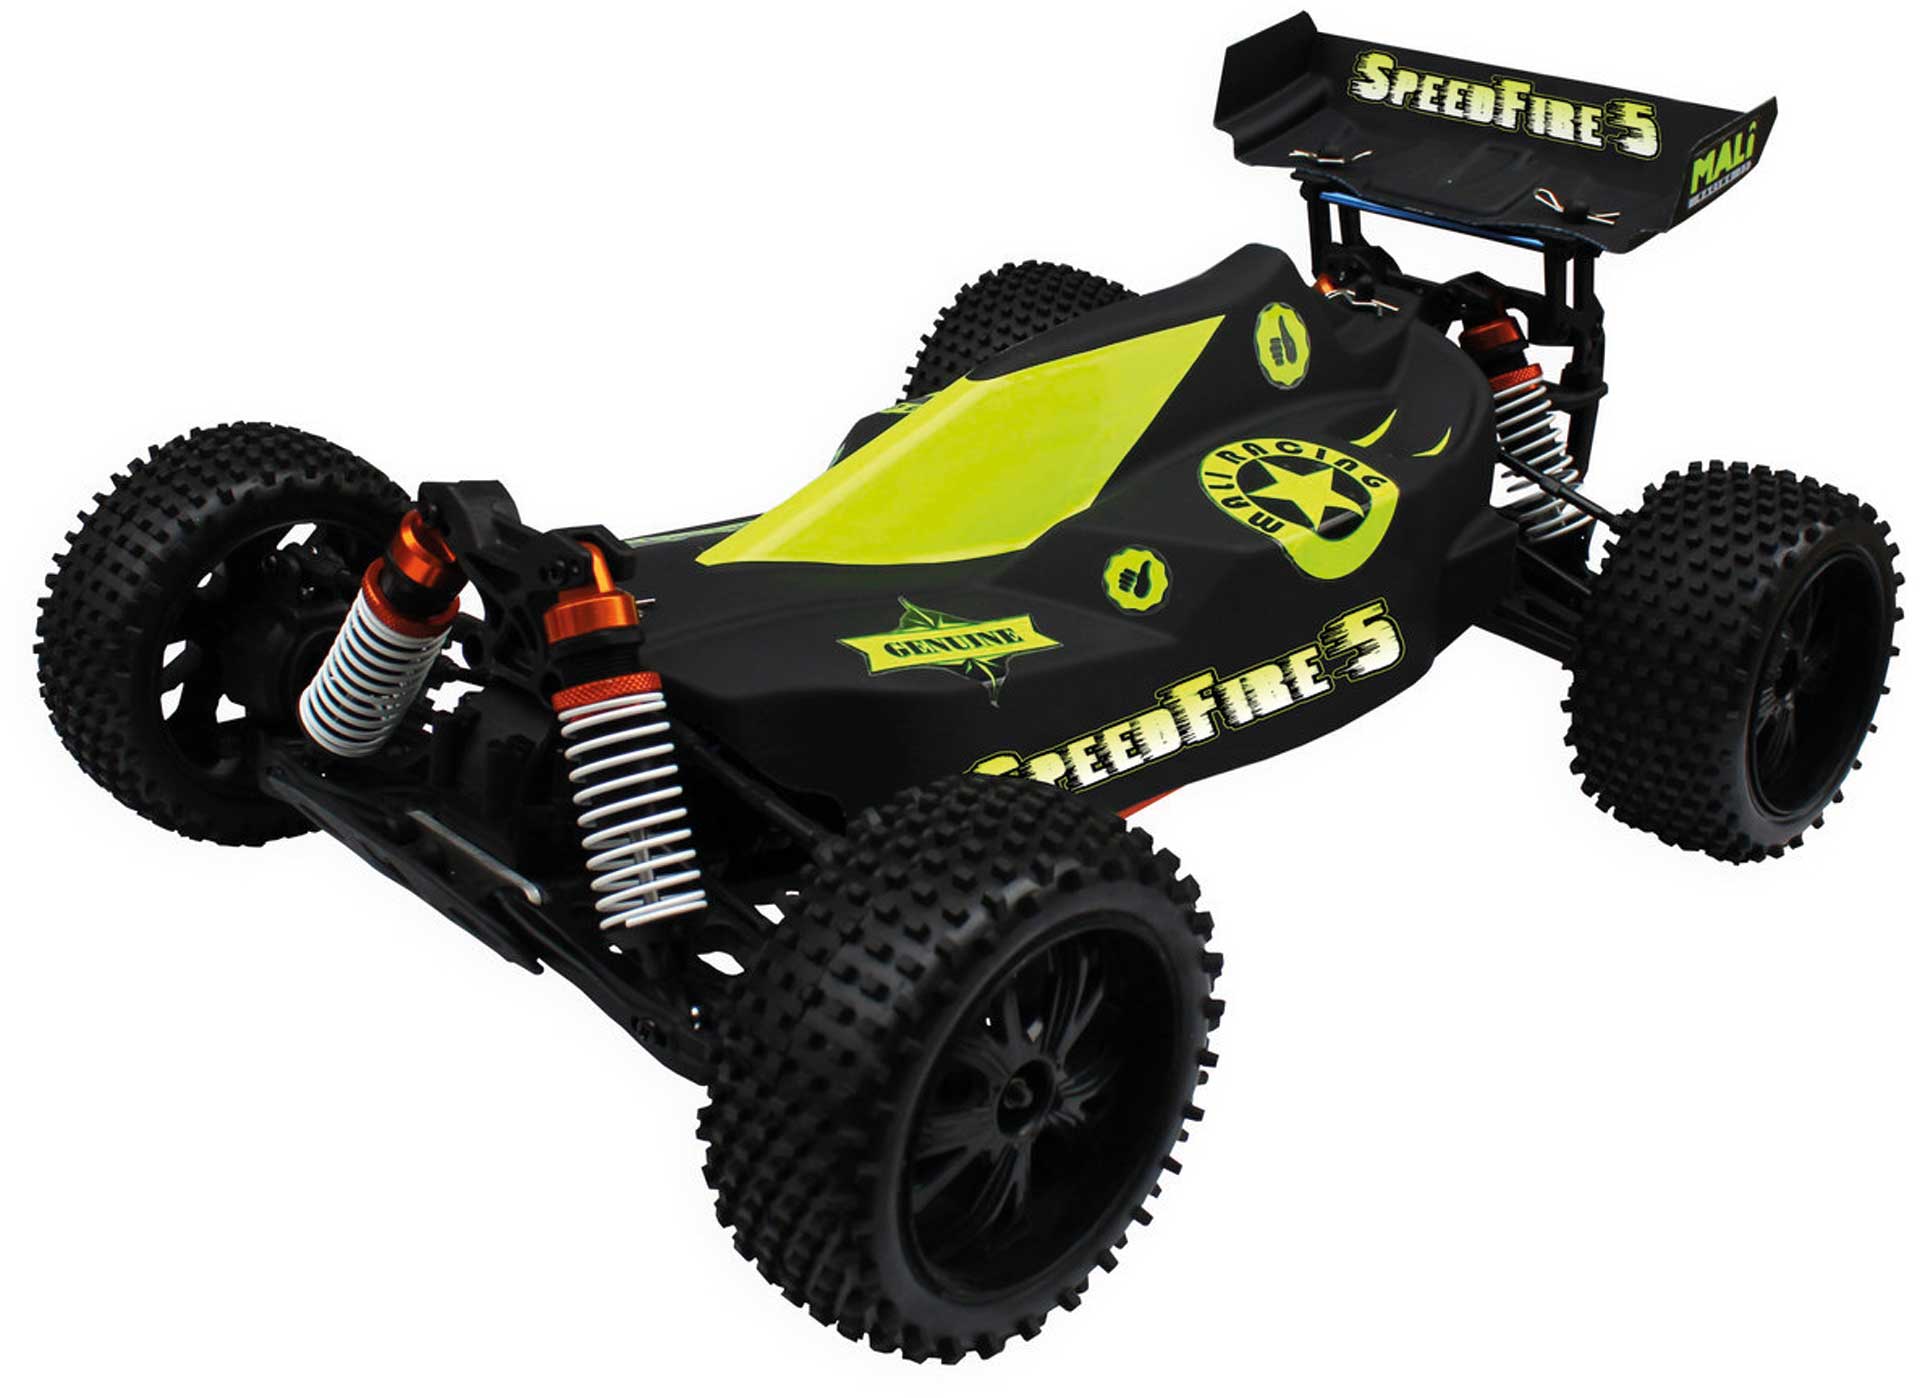 DRIVE & FLY MODELS SPEEDFIRE 5 BUGGY BRUSHED 1/10XL 4WD RTR